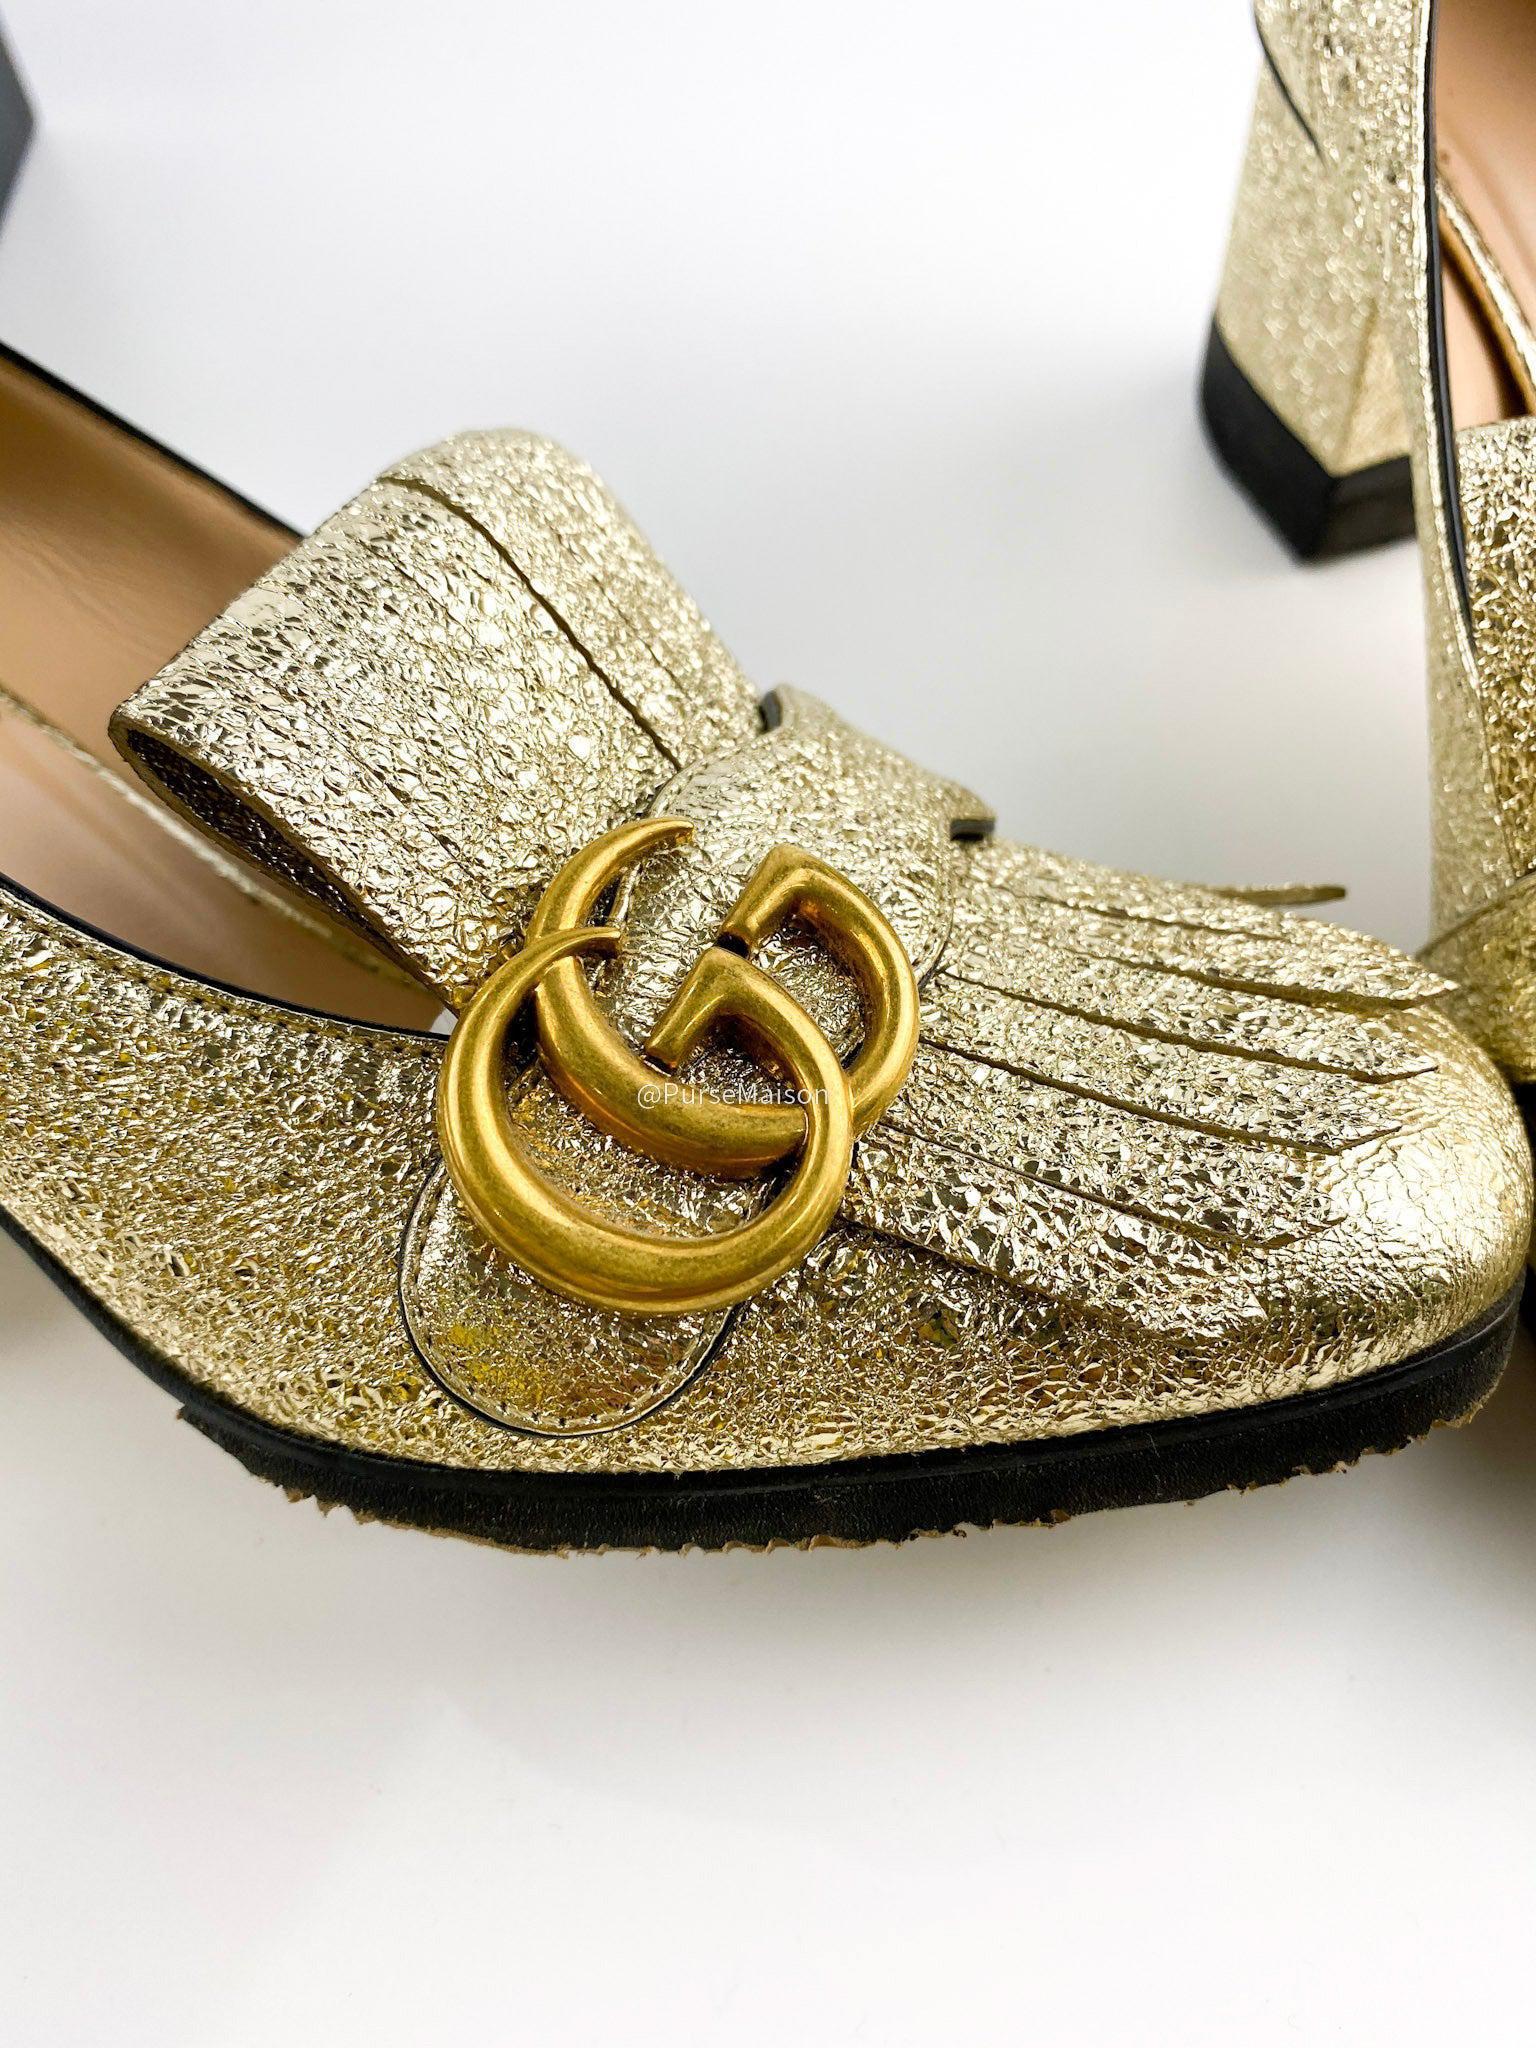 Gucci Marmont loafer heels Fringed Metallic Gold (Size 37.5 EUR)